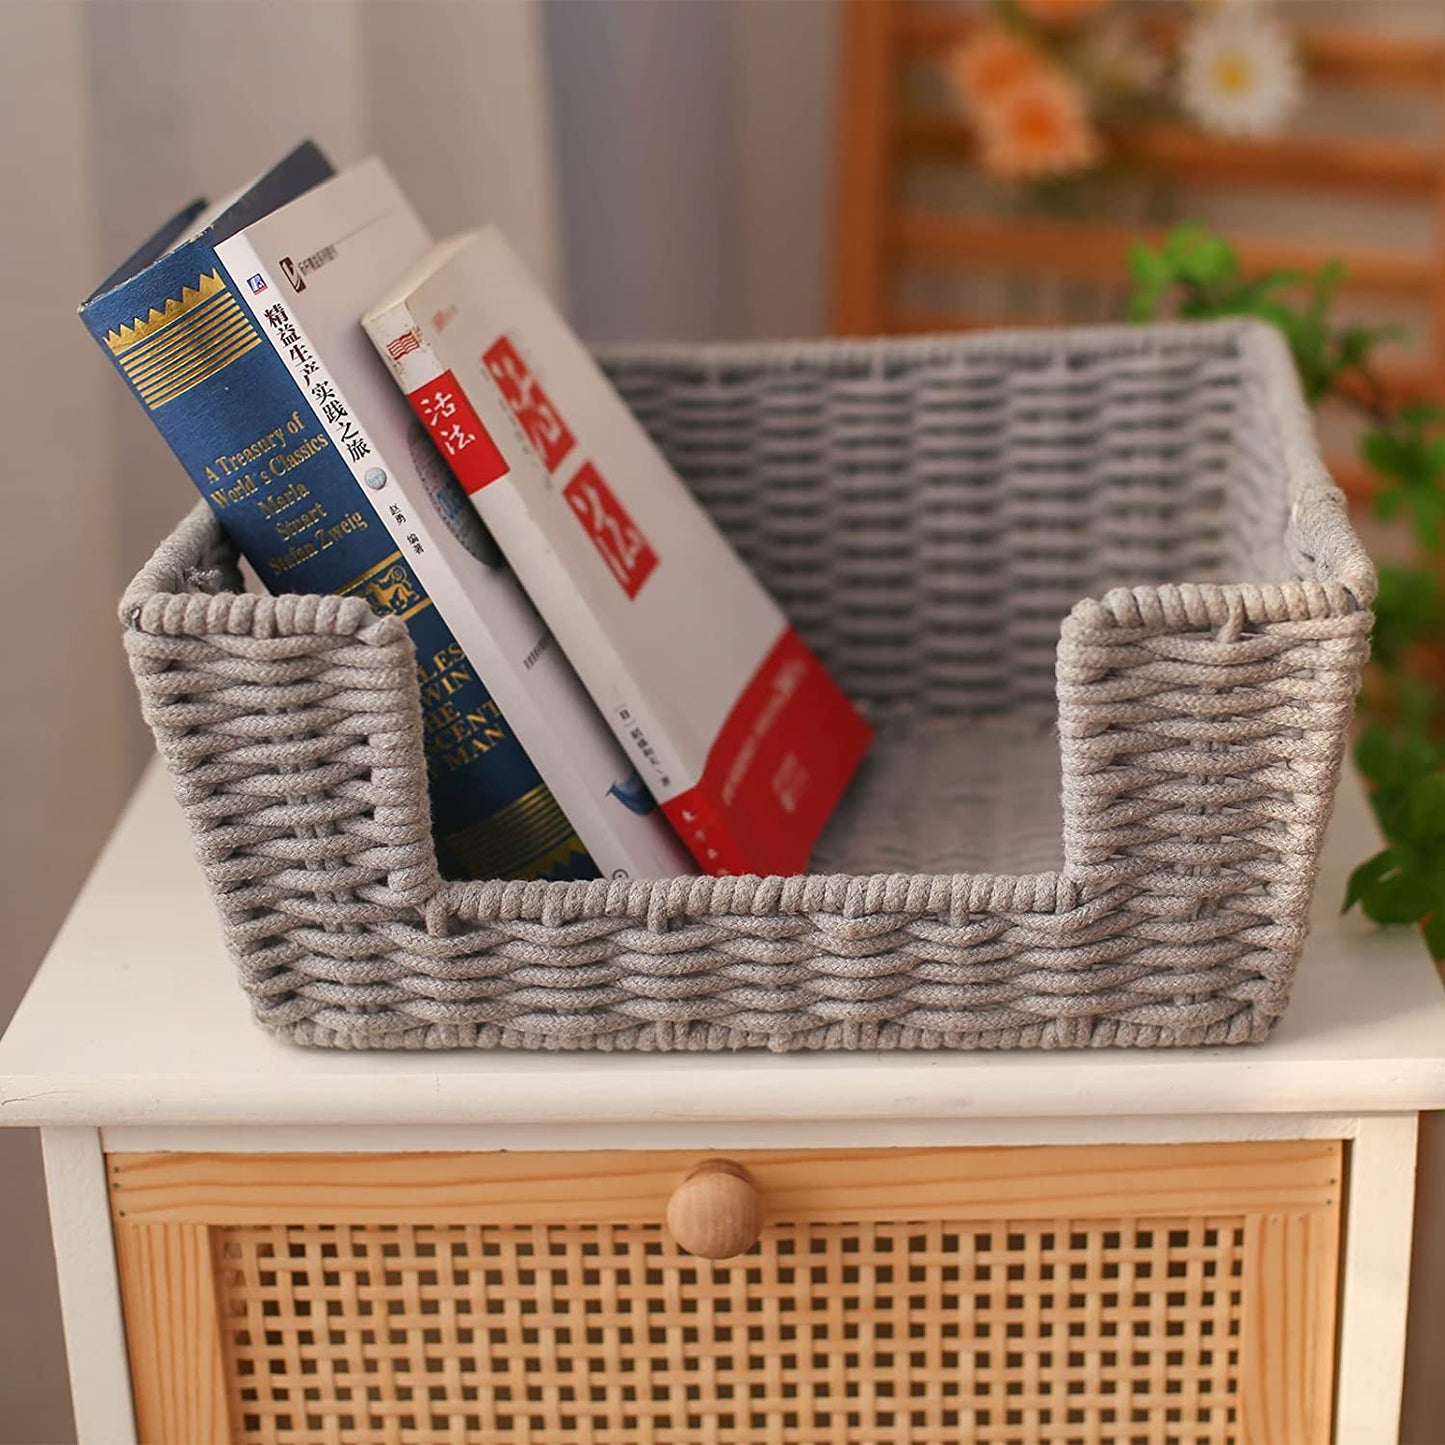 Cotton Rope Storage Basket with Handles Woven Open-Front Baskets Storage Wicker Organizing Baskets for kitchen/Bathroom/Bedroom/Laundry Room/Pantry (Gray)